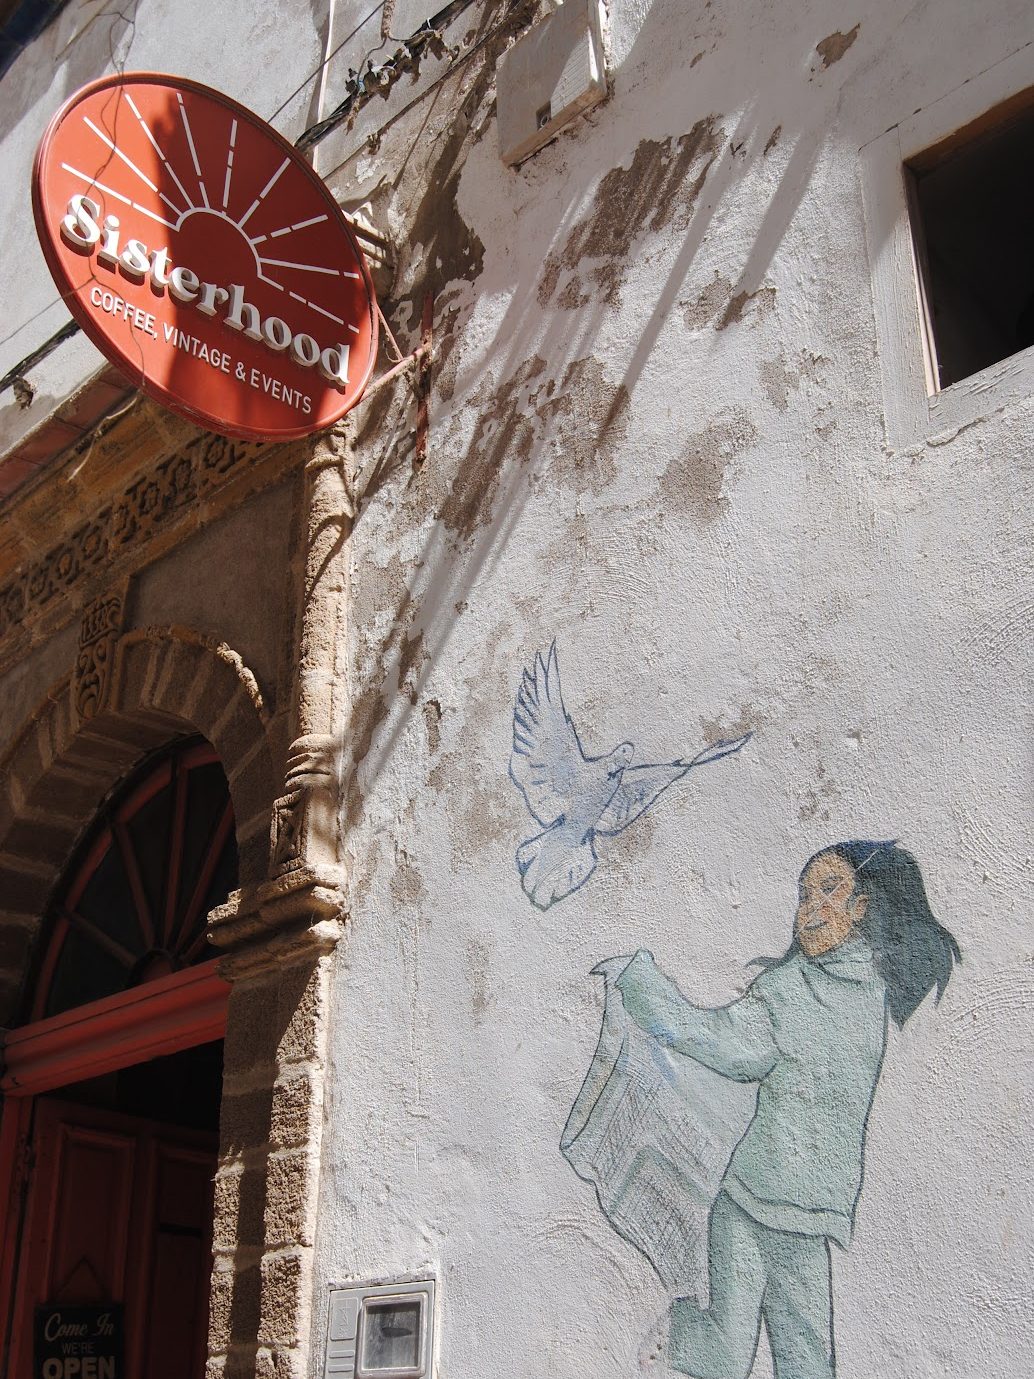 A sign that says "Sisterhood" above a small mural of a woman and a dove